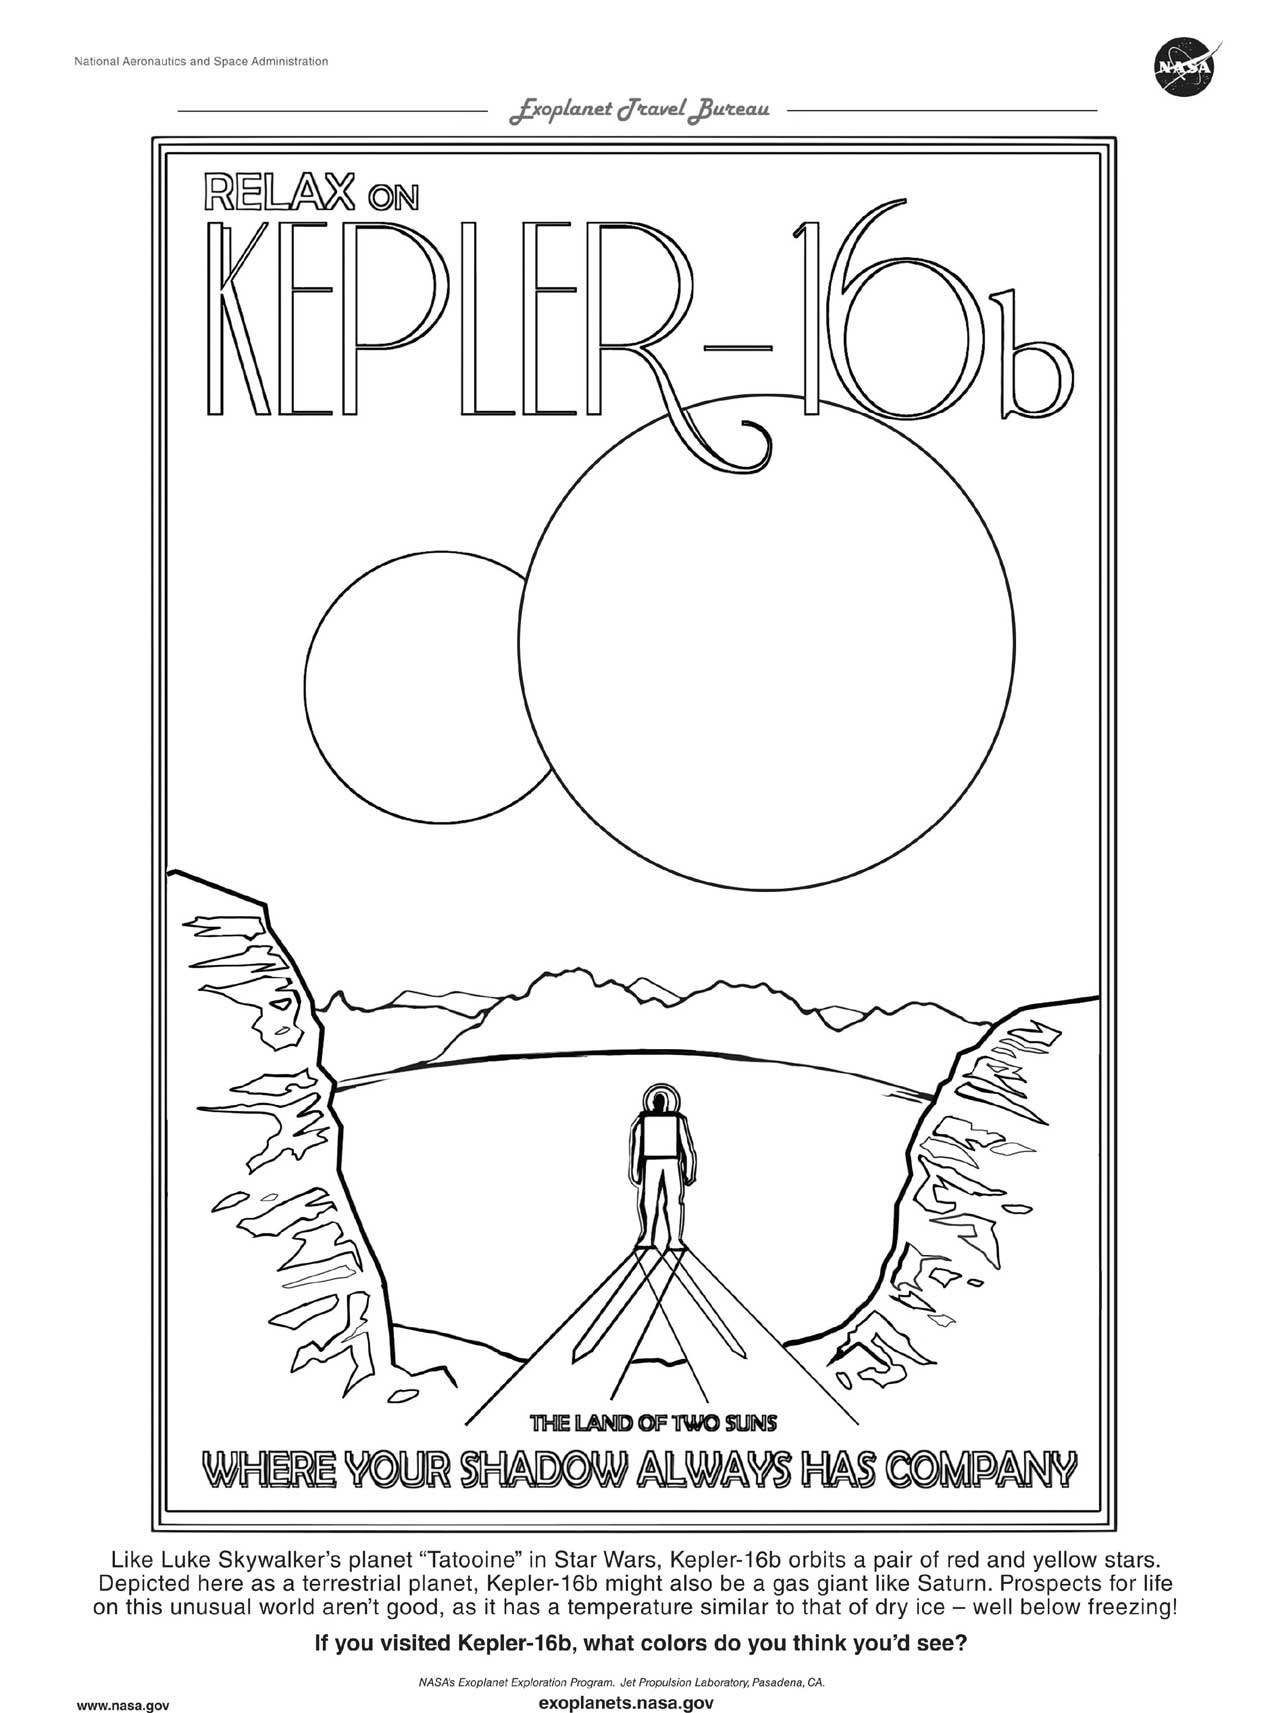 If you visited Kepler-16b, what colors do you think you’d see? Download the coloring page based on our Exoplanet Travel Bureau poster for the world with two suns.